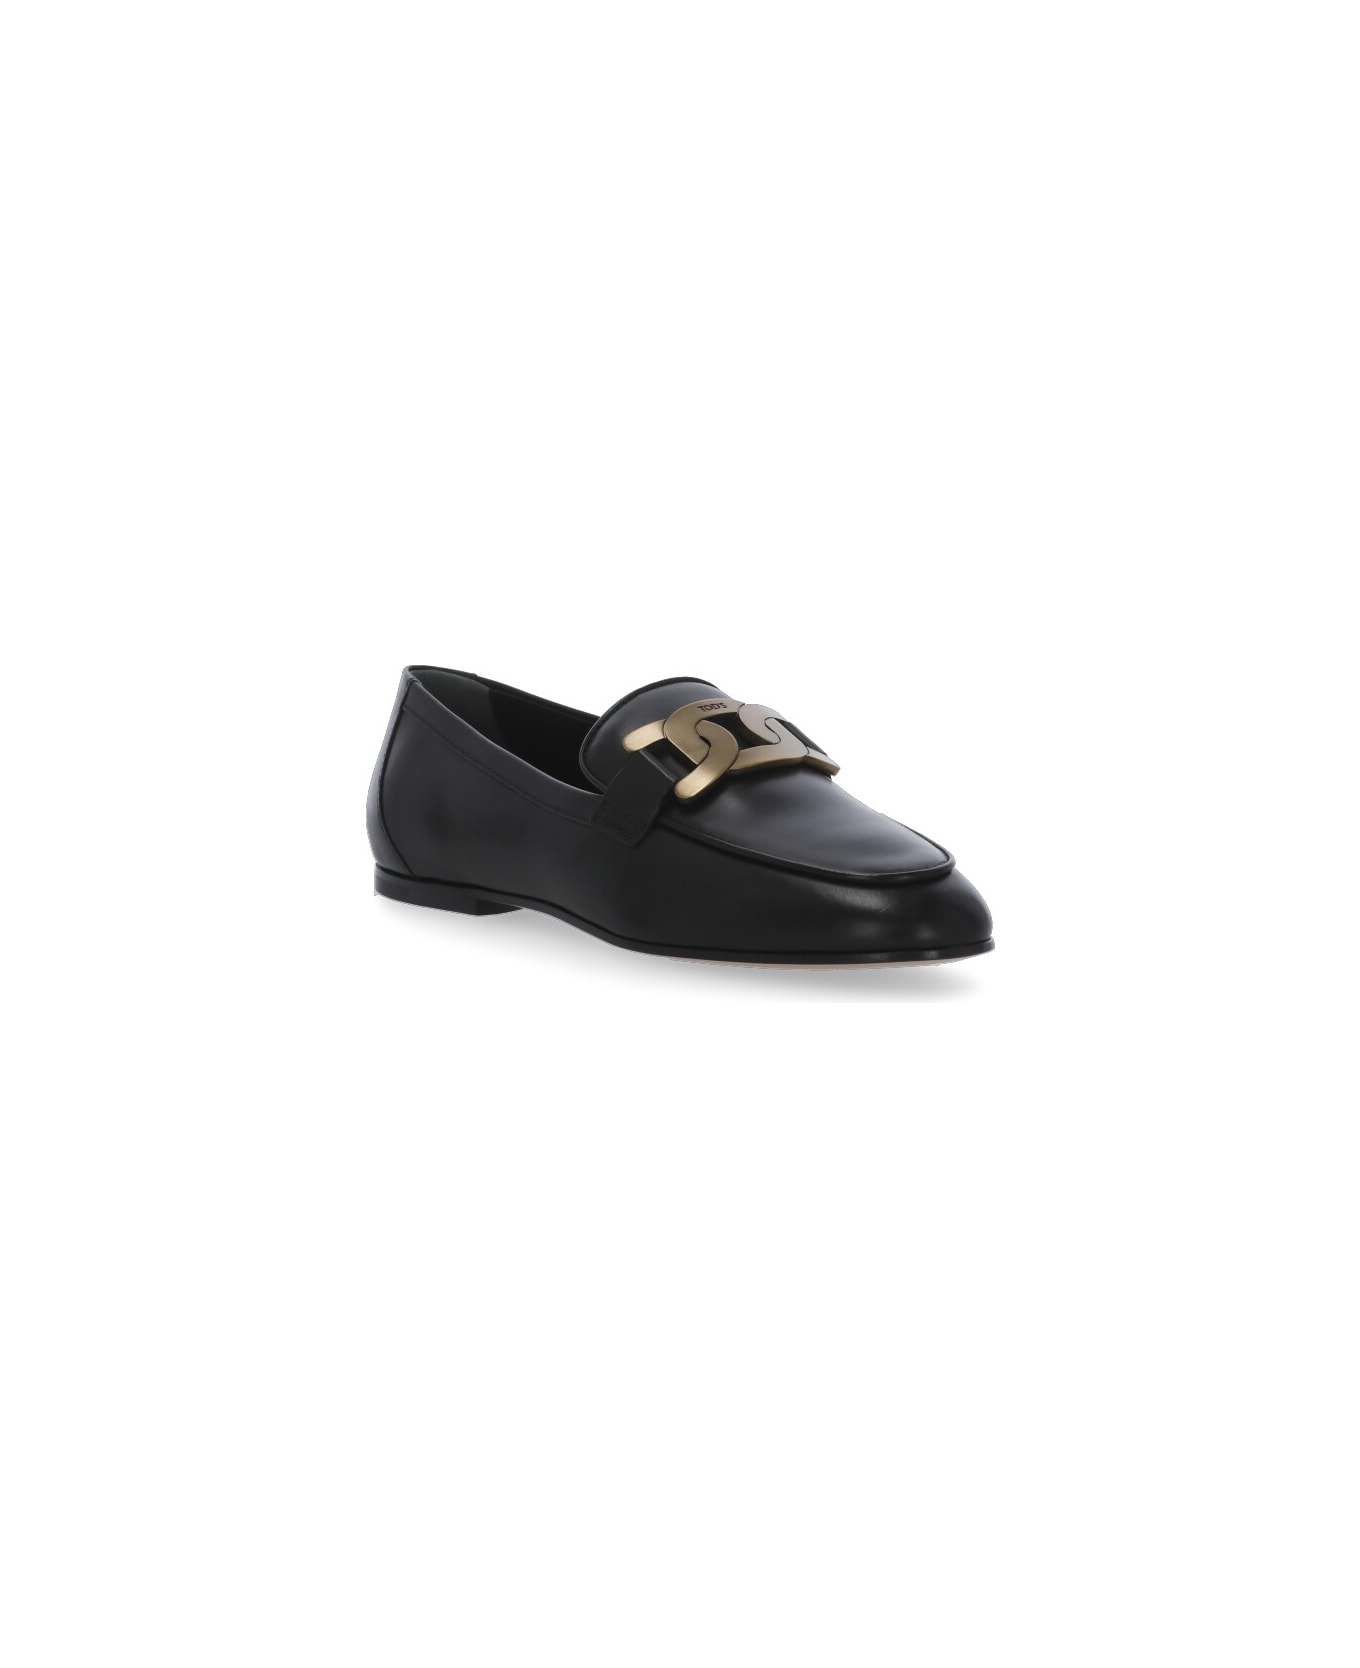 Tod's 'kate' Leather Loafer - Nero フラットシューズ